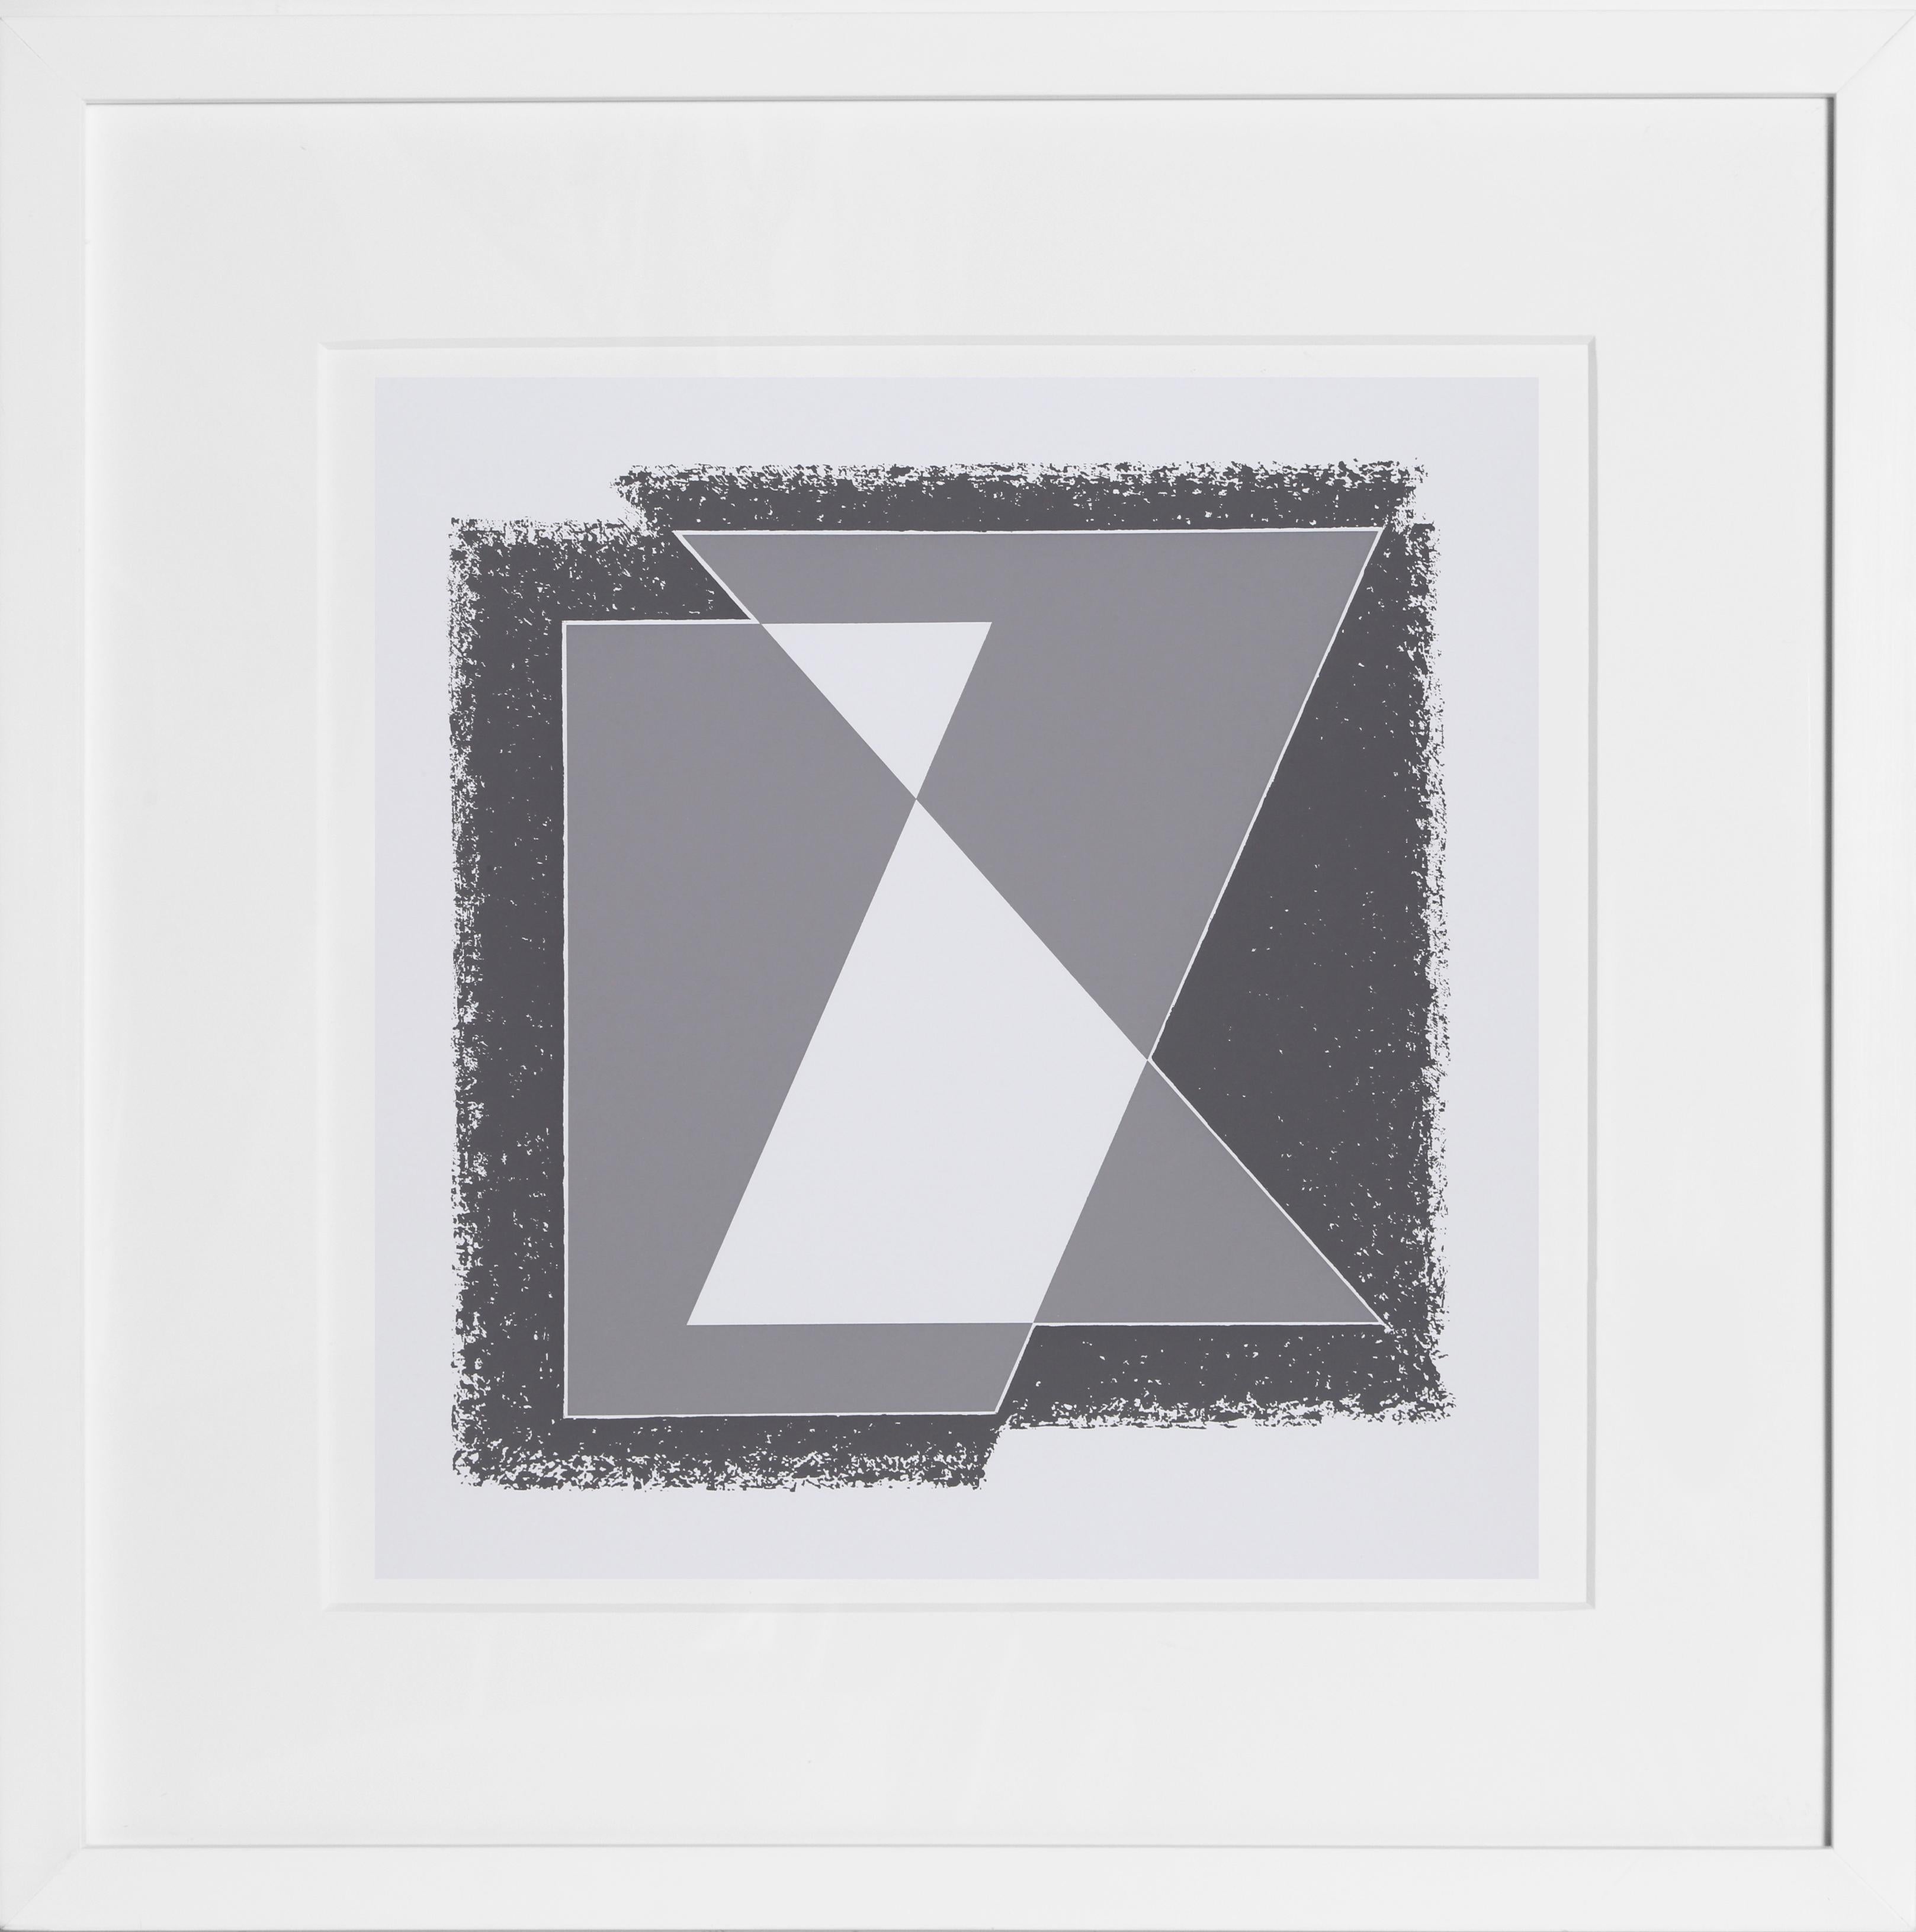 From the portfolio “Formulation: Articulation” created by Josef Albers in 1972. This monumental series consists of 127 original silkscreens that are a definitive survey of the artist's most important color and shape theories.  A copy of the colophon